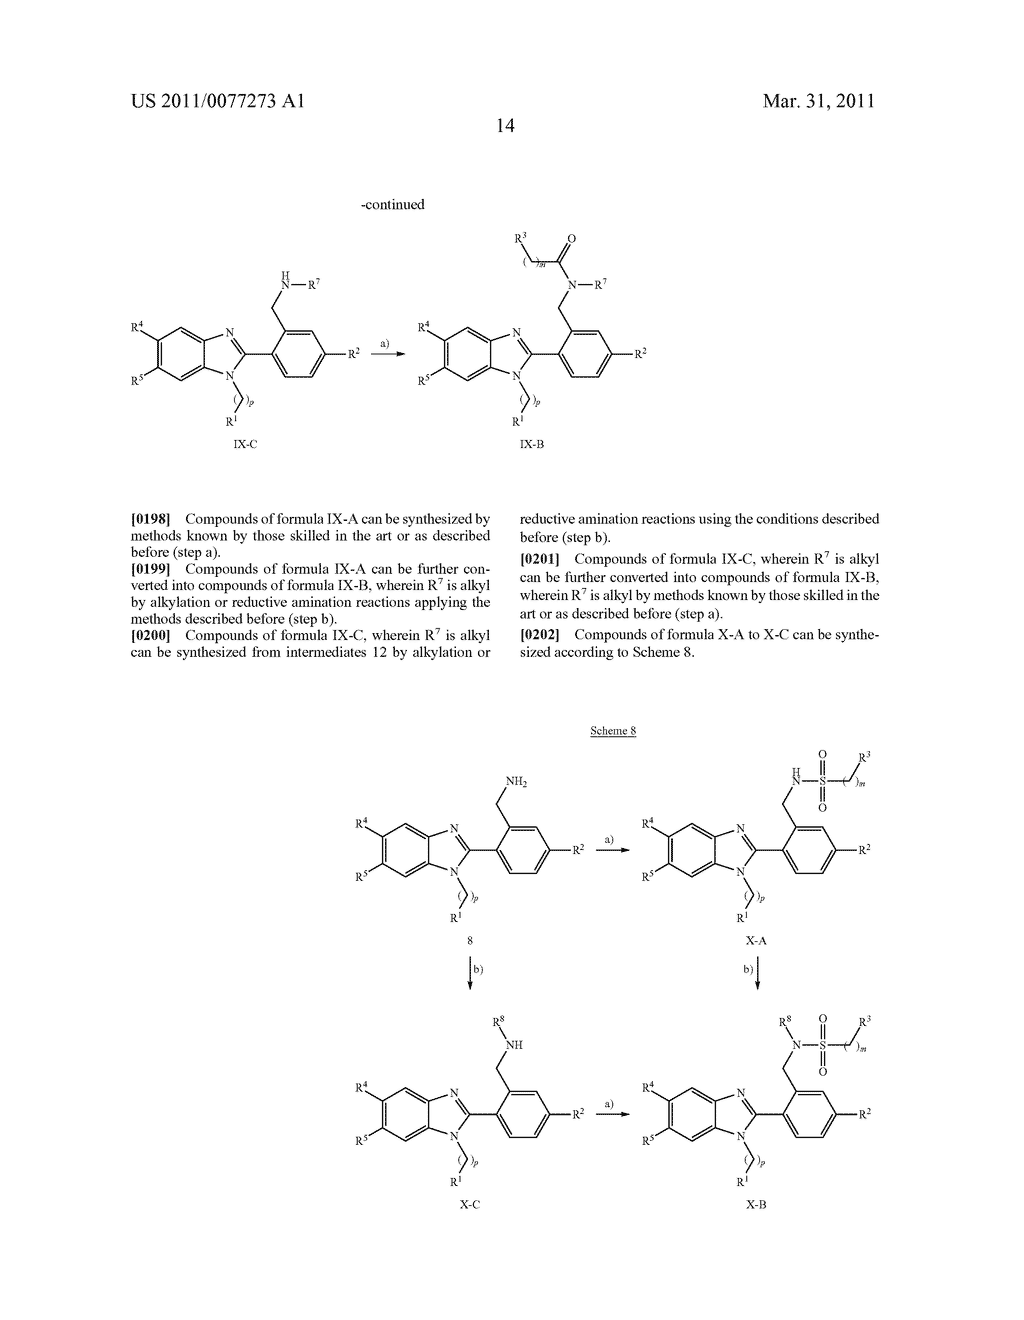 NEW BENZIMIDAZOLE DERIVATIVES - diagram, schematic, and image 15